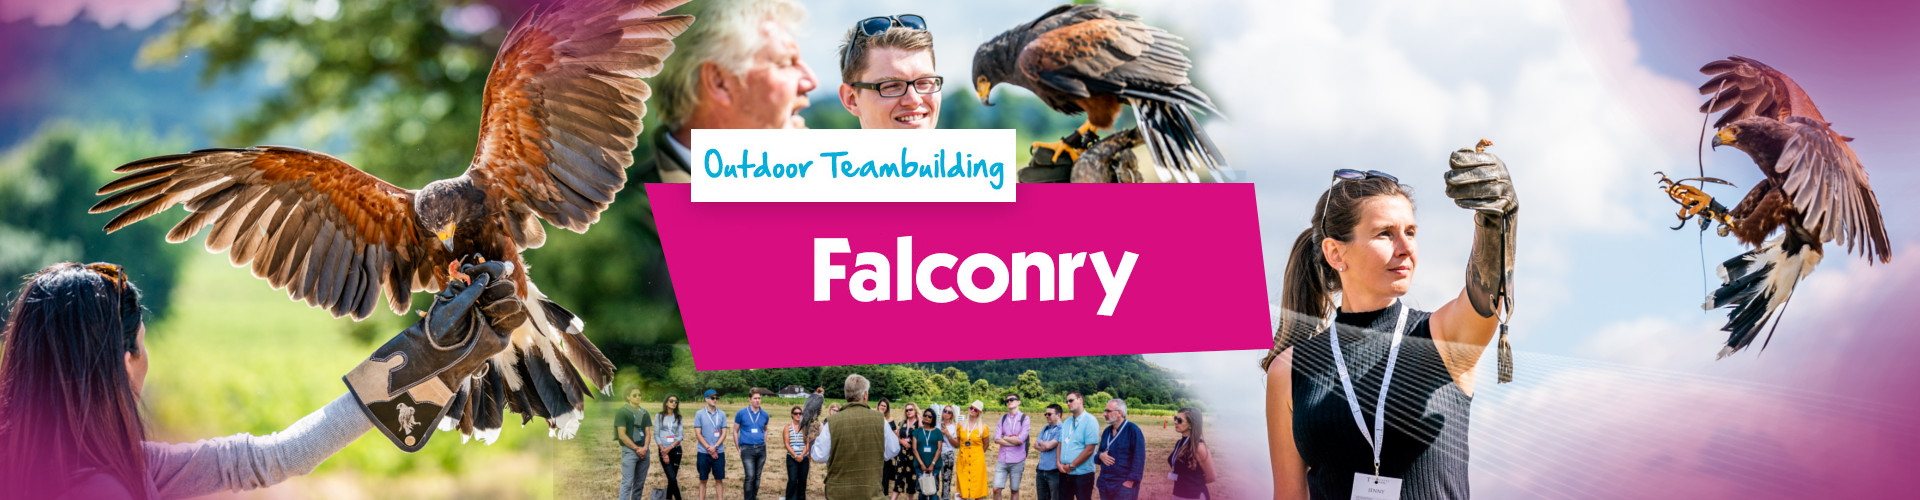 Falconry Banner